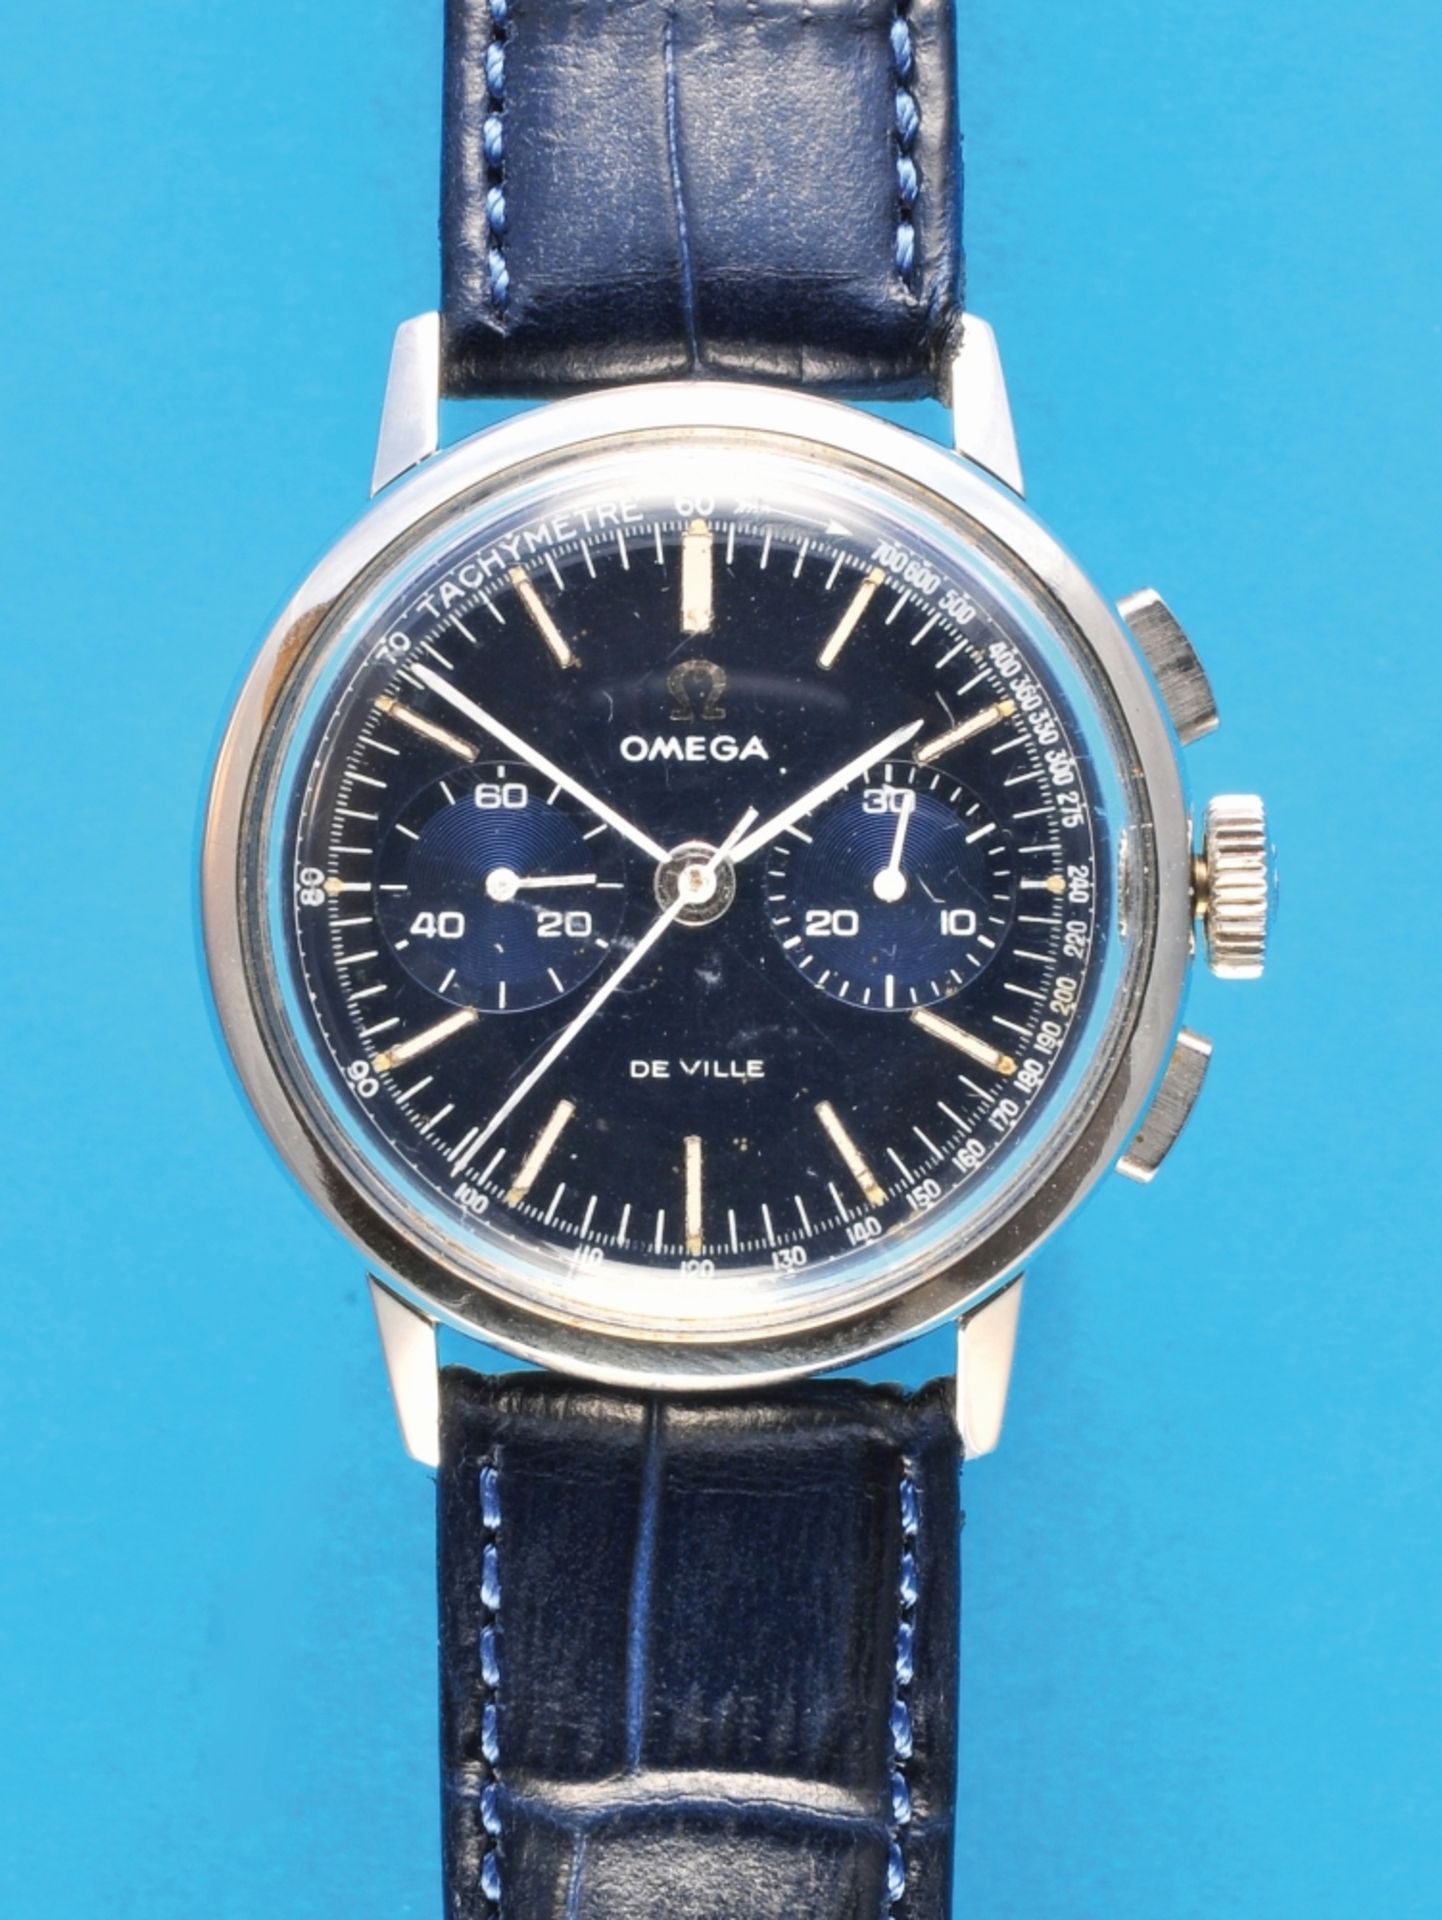 Omega "De Ville" wristwatch with chronograph and 30-minute counter, cal. Omega 860, reference 101.00